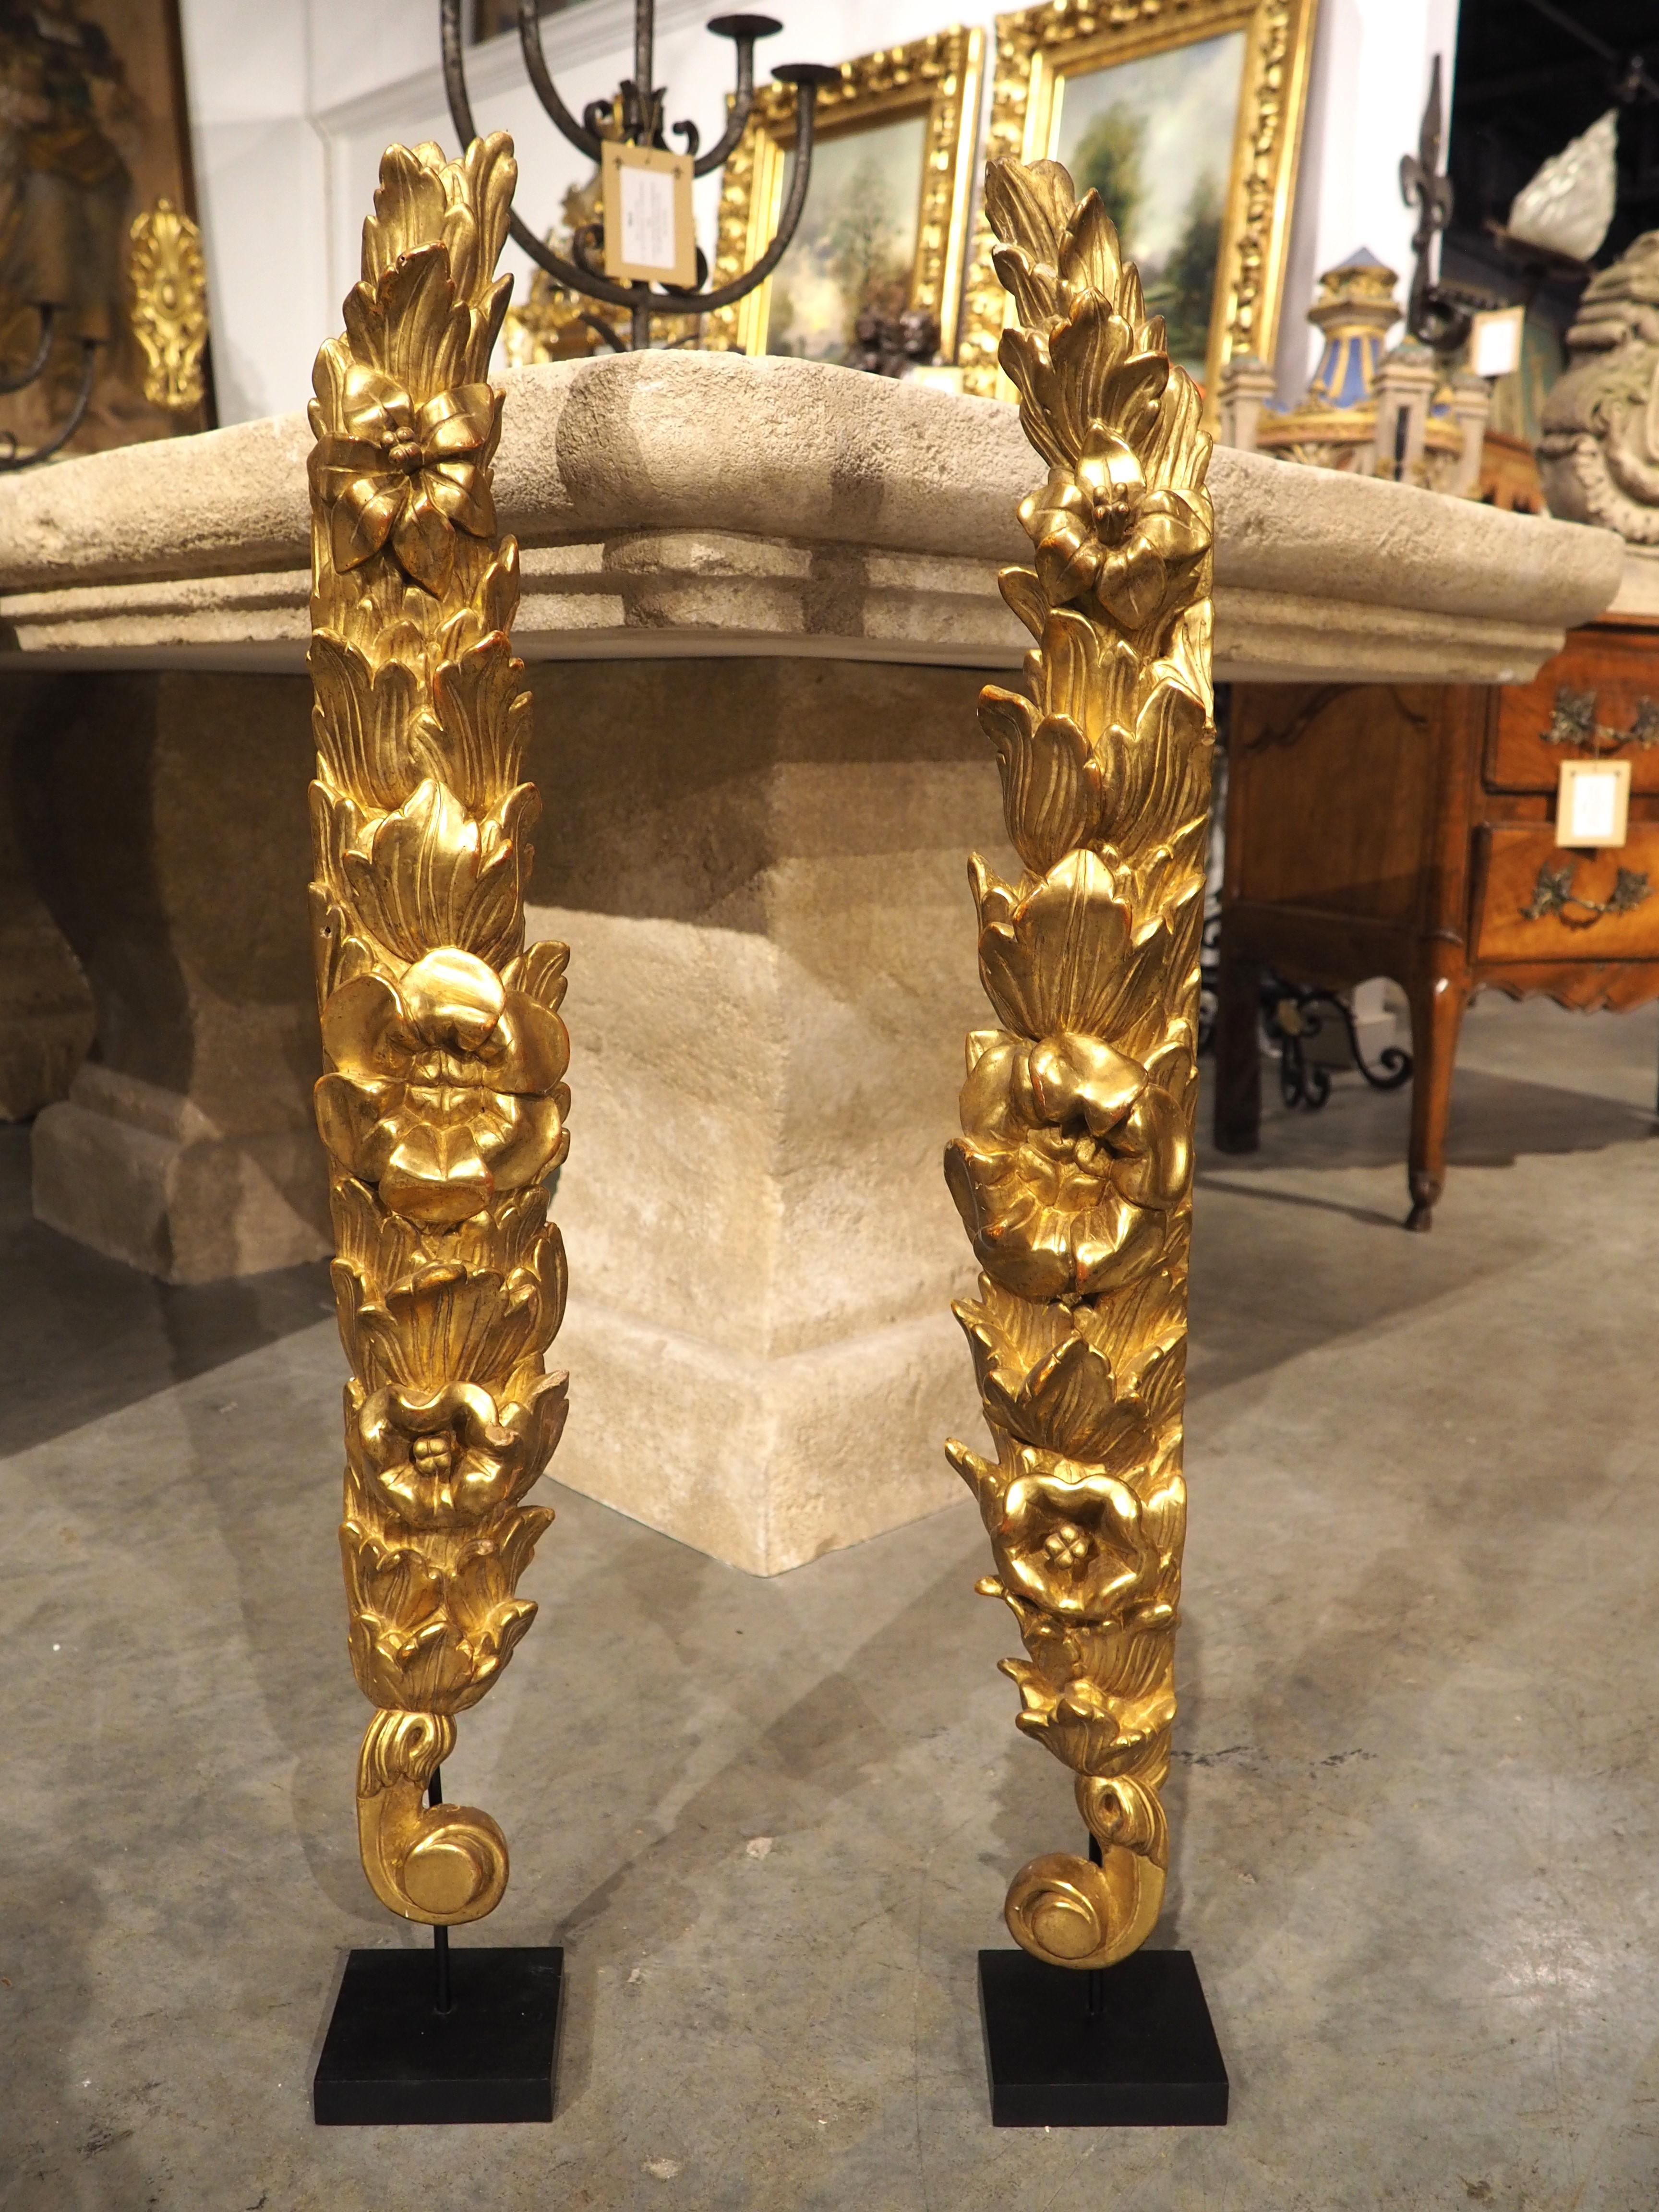 Pair of 18th Century Giltwood Altar Ornaments from Italy (34 inches tall) 5